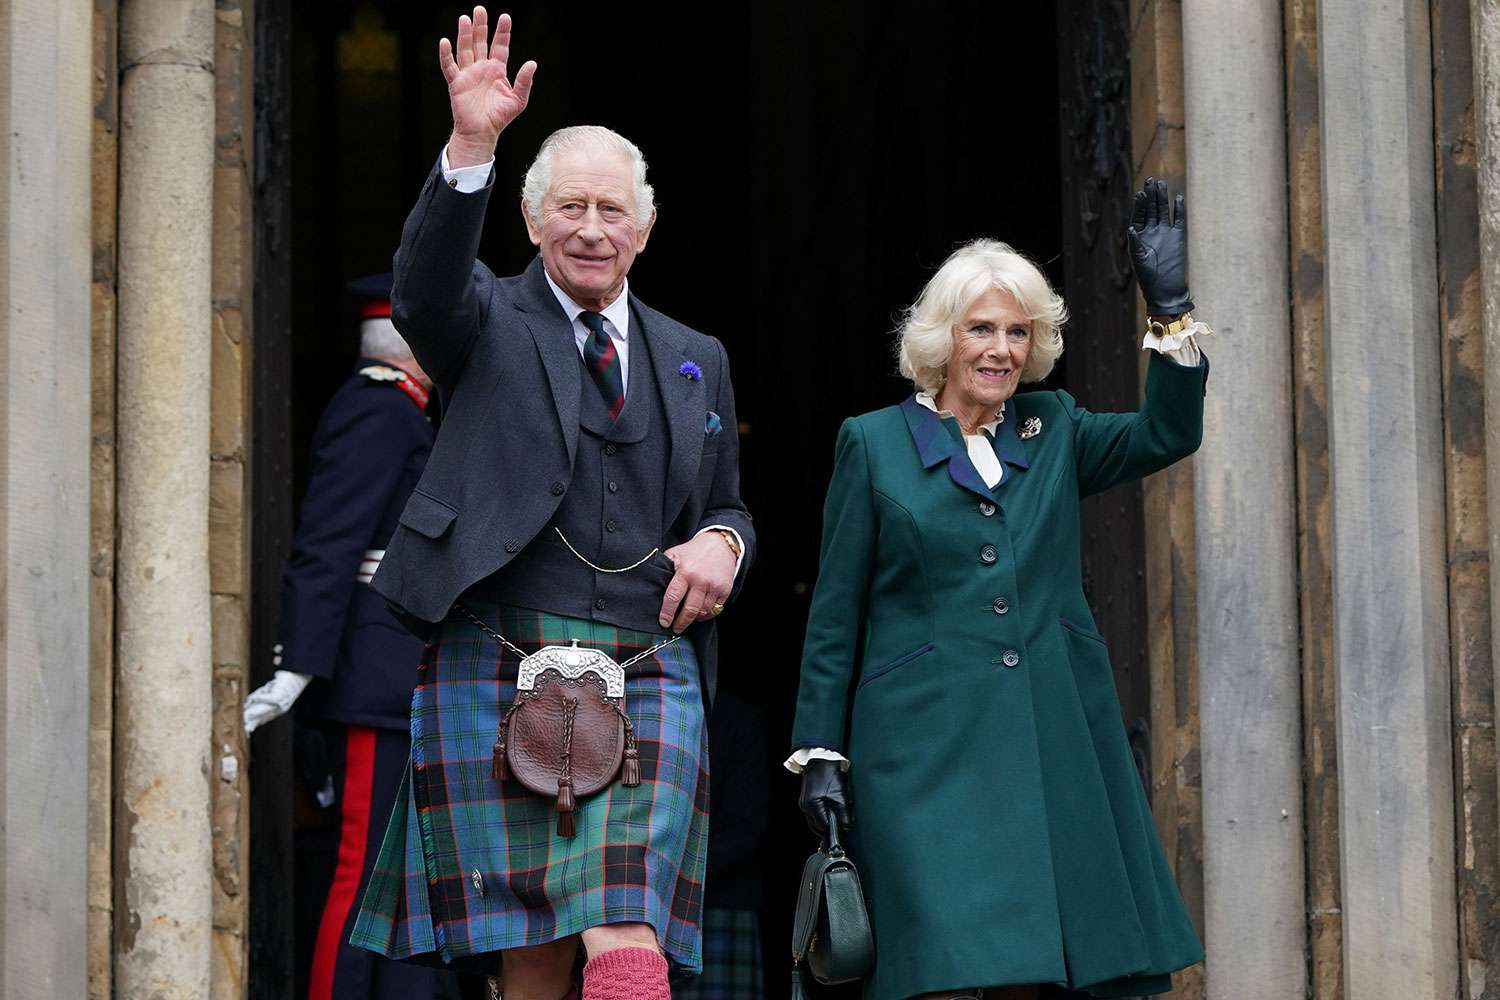 King Charles III and Camilla, Queen Consort, waves as they leave Dunfermline Abbey, after a visit to mark its 950th anniversary, and after attending a meeting at the City Chambers in Dunfermline where the King formally marked the conferral of city status on the former town on October 3, 2022 in Dunfermline, Scotland.